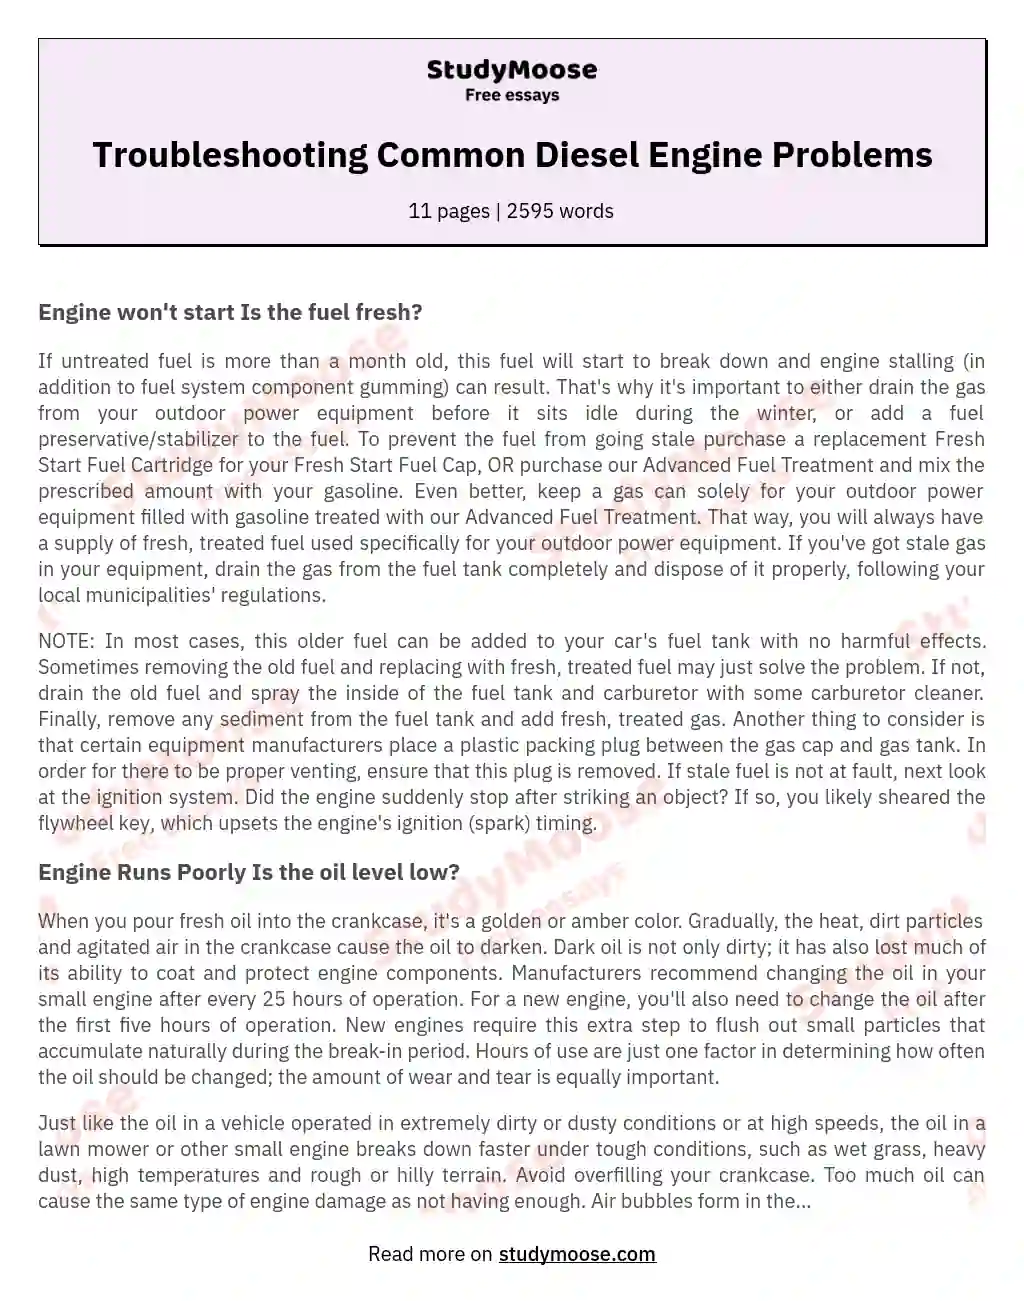 Troubleshooting Common Diesel Engine Problems essay